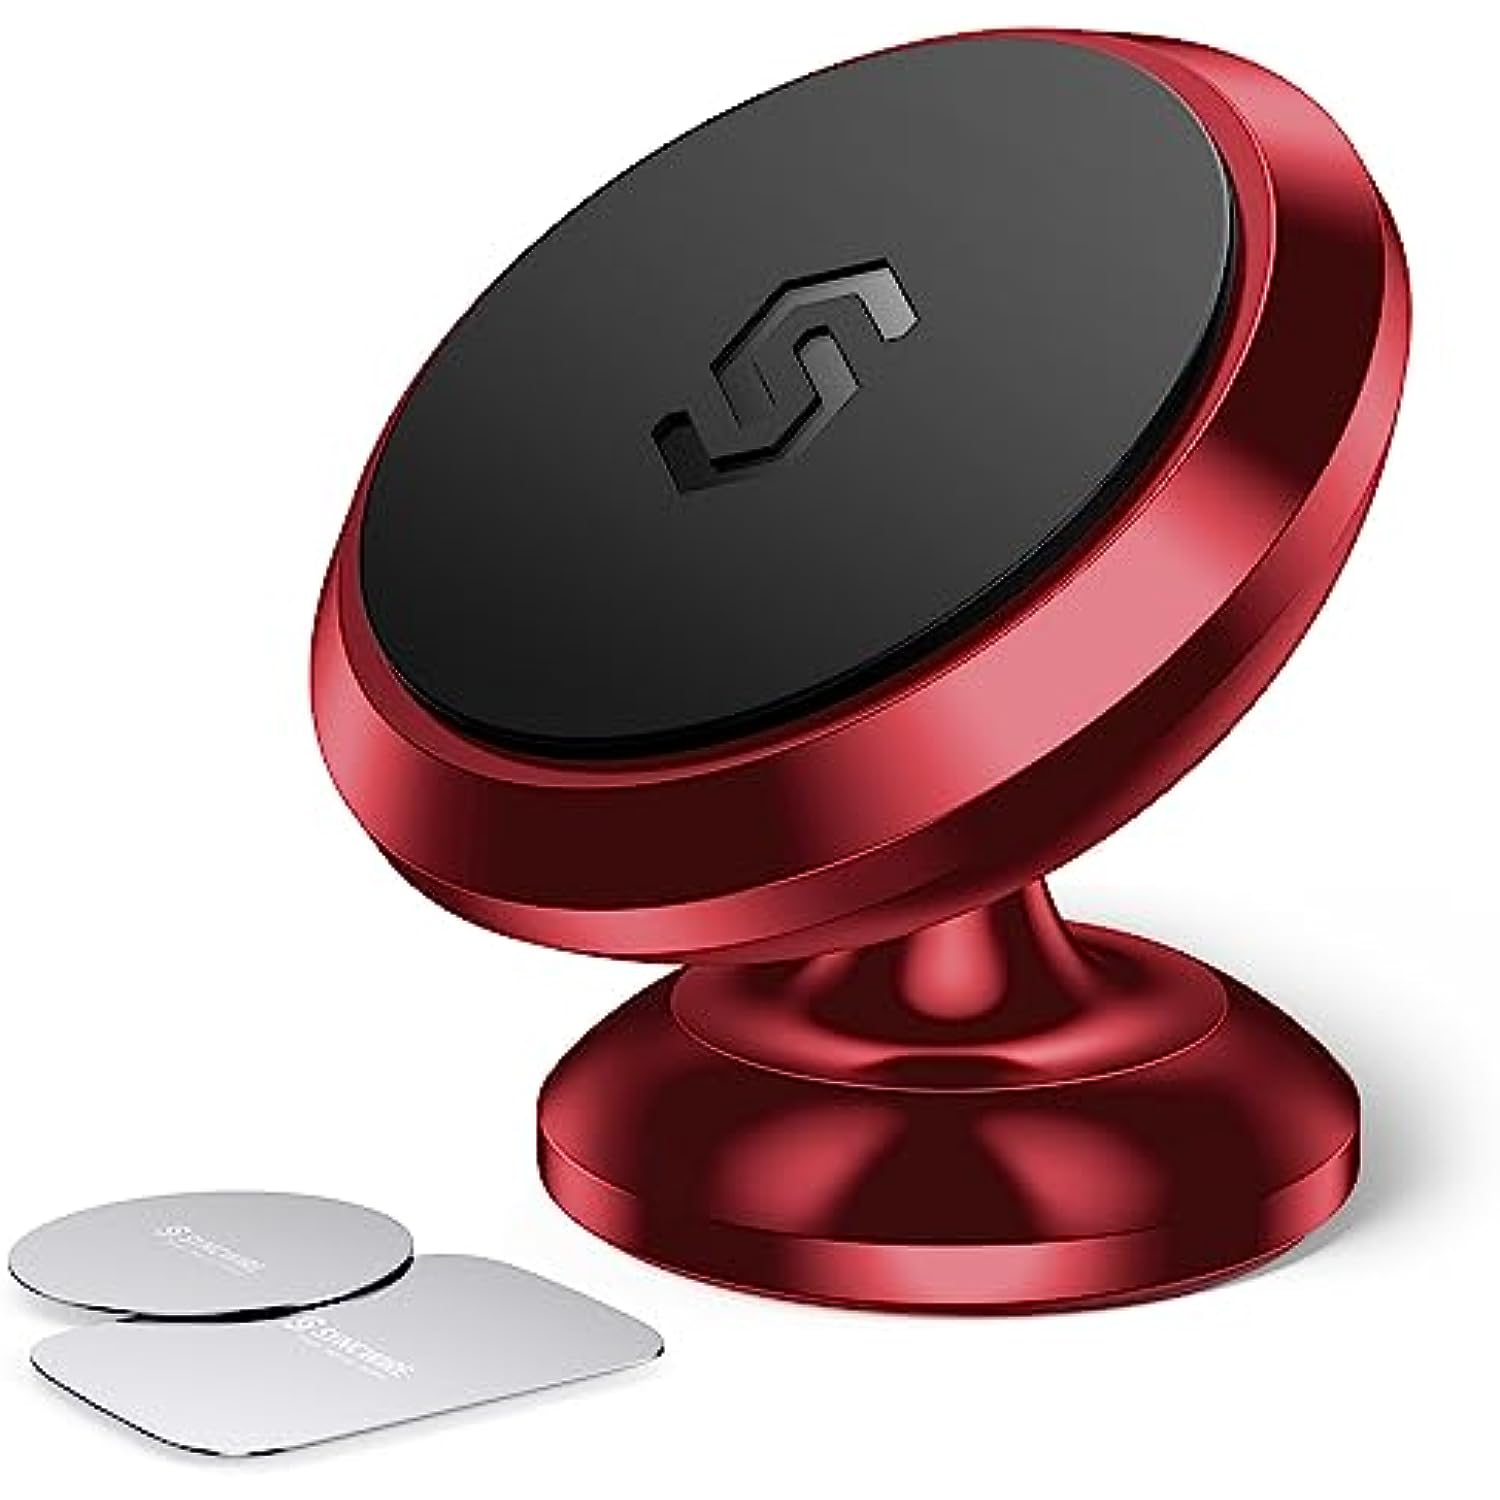 Adjustable Magnet Cell Phone Mount Compatible with iPhone, Samsung, LG, GPS & Mini Tablet